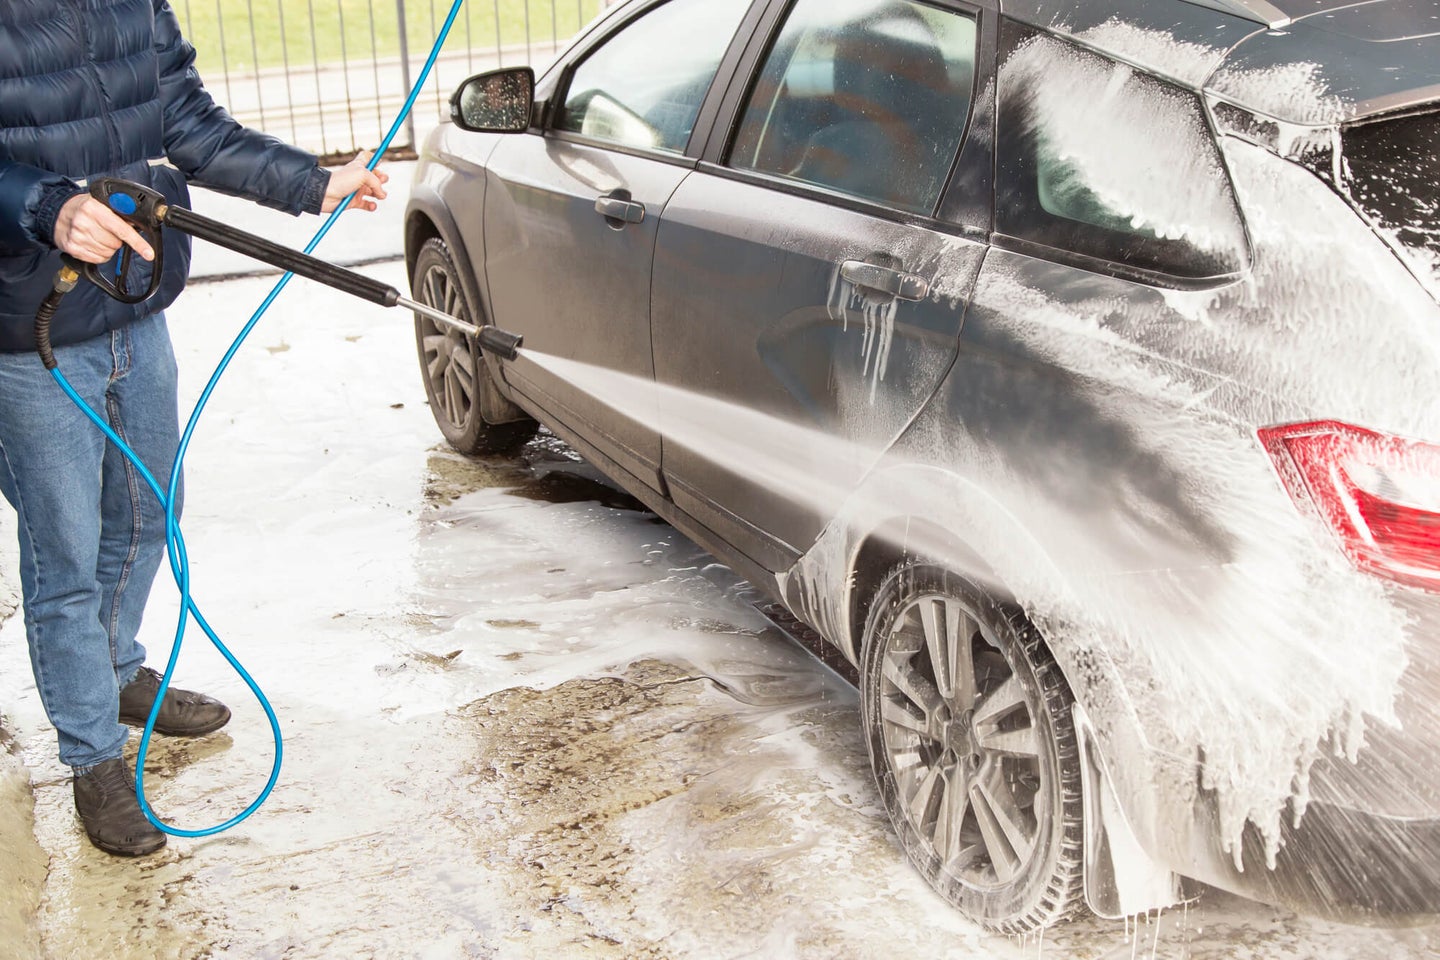 The Best Gas Pressure Washers (Review & Buying Guide) in 2022